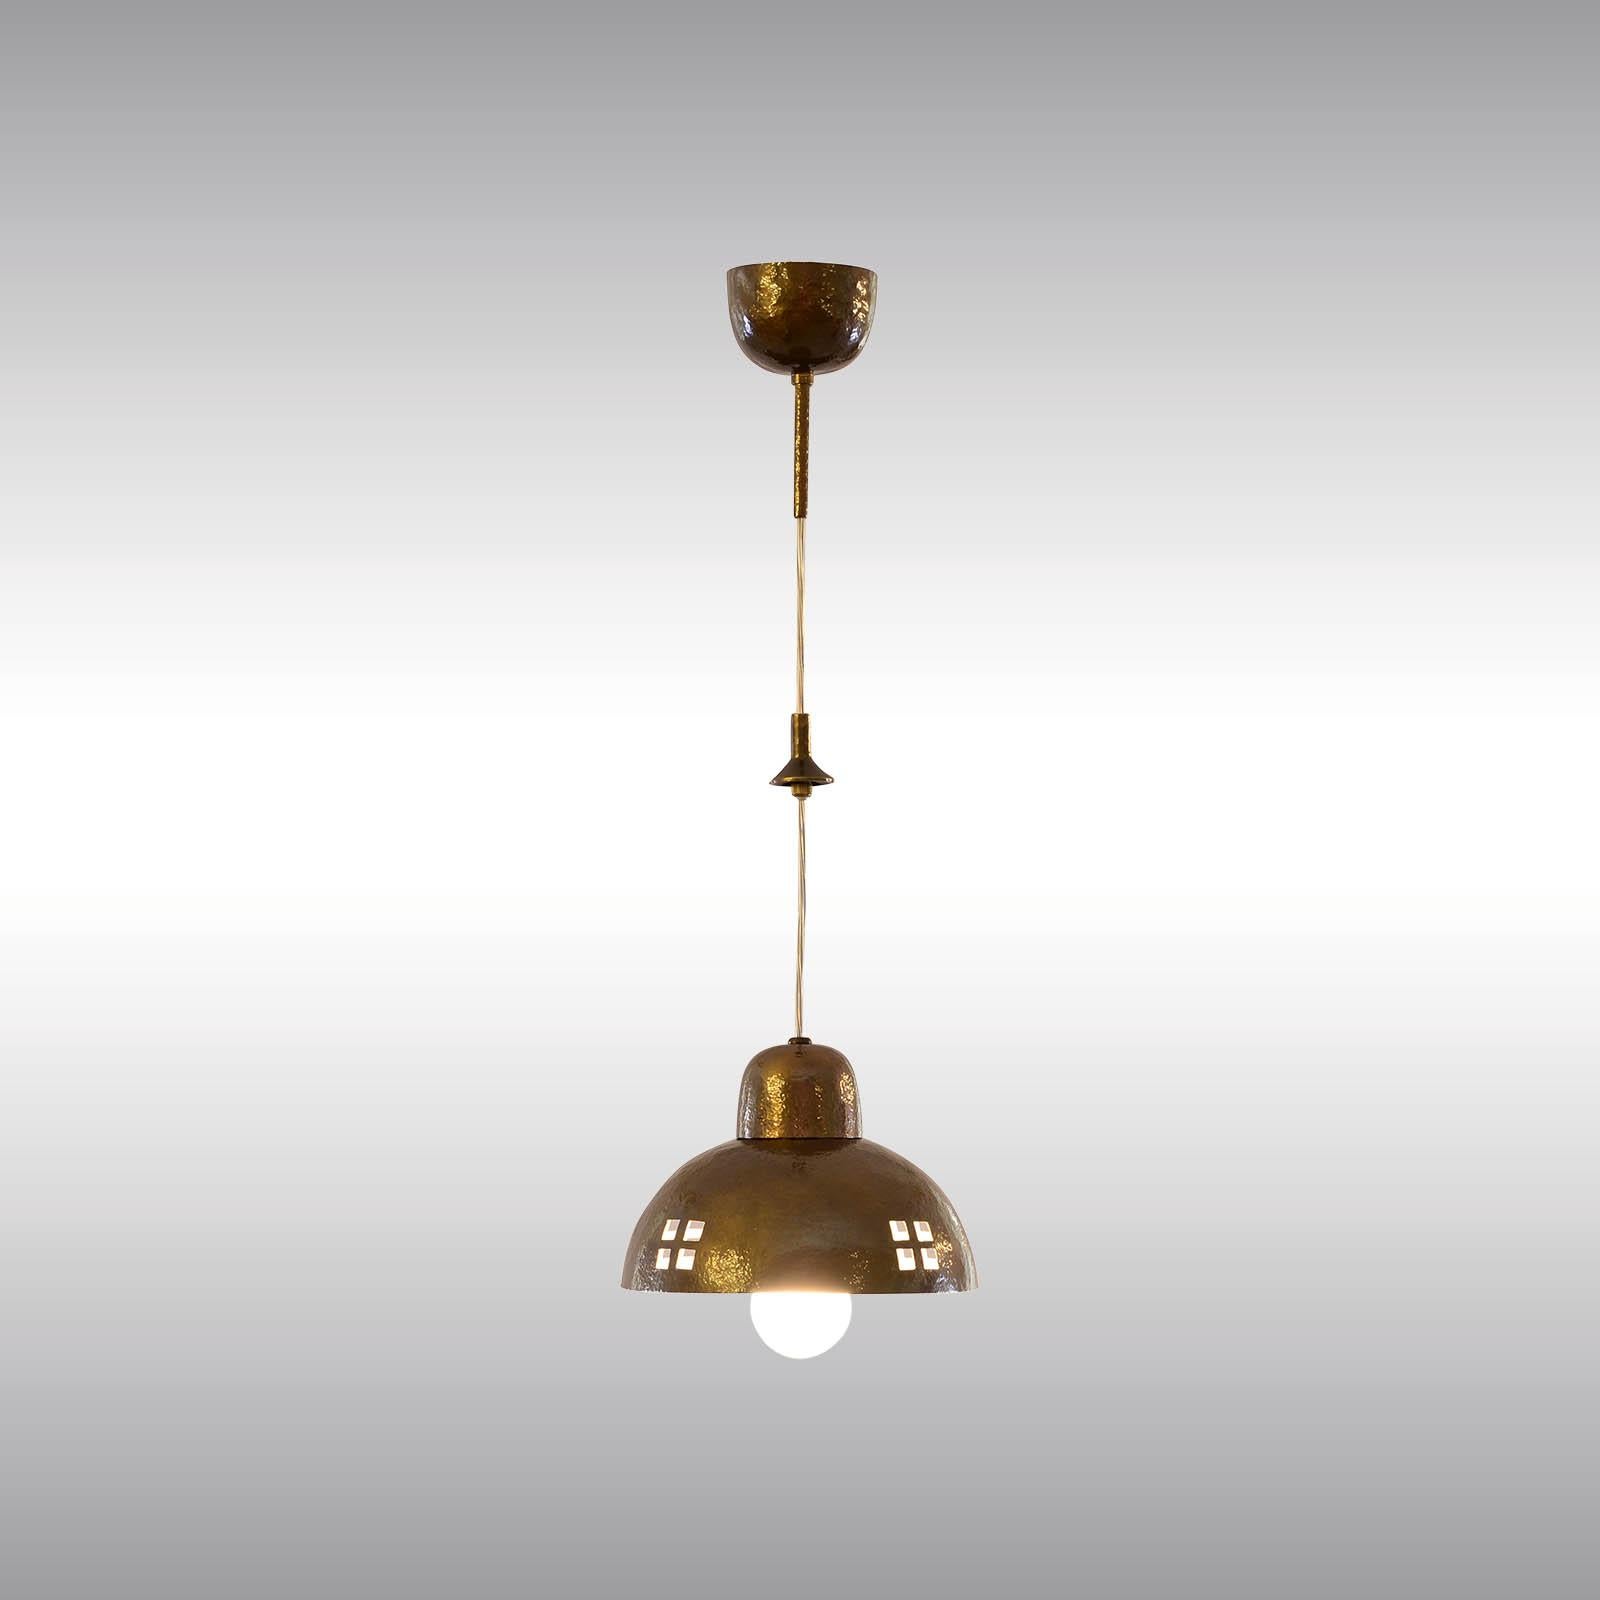 Before the funding of the historical Wiener Werkstätte, four pieces of this lamp were designed and manufactured for the Hochstetter Apartment.
Now manufactured at the Woka Lamps Workshop in Vienna
Most components according to the UL regulations,